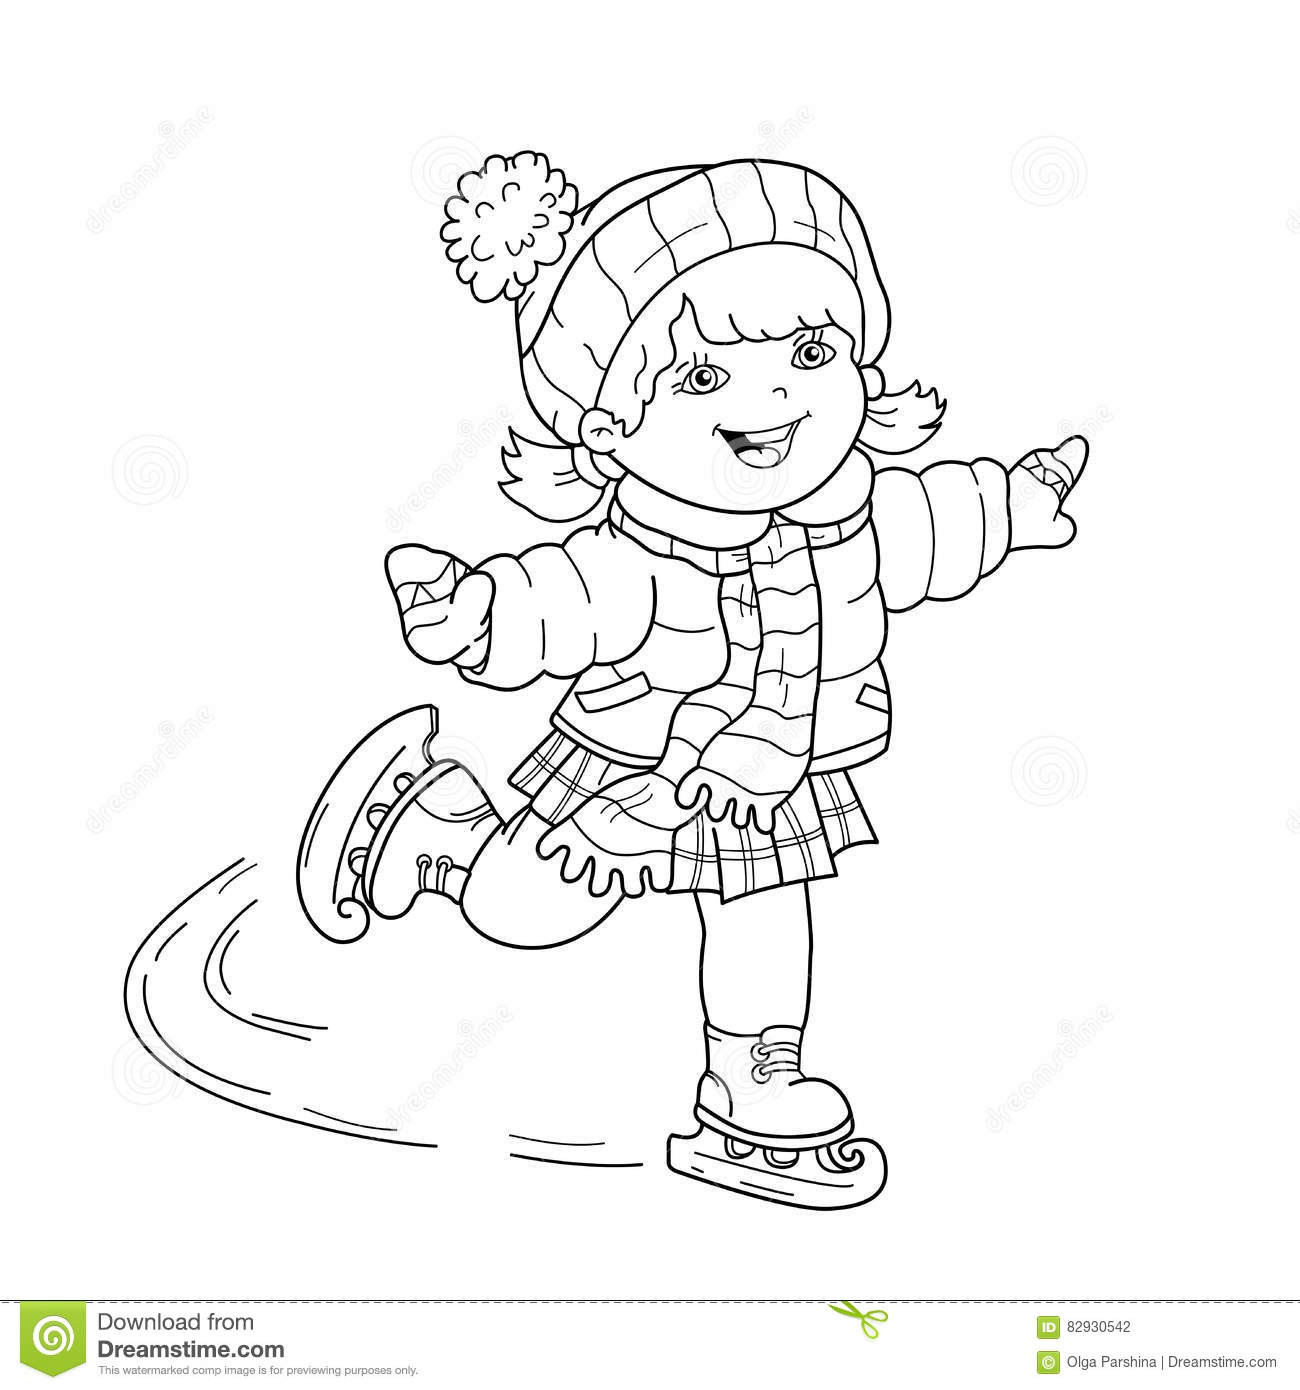 Winter Coloring Pages For Girls
 Coloring Page Outline Cartoon Girl Skating Winter